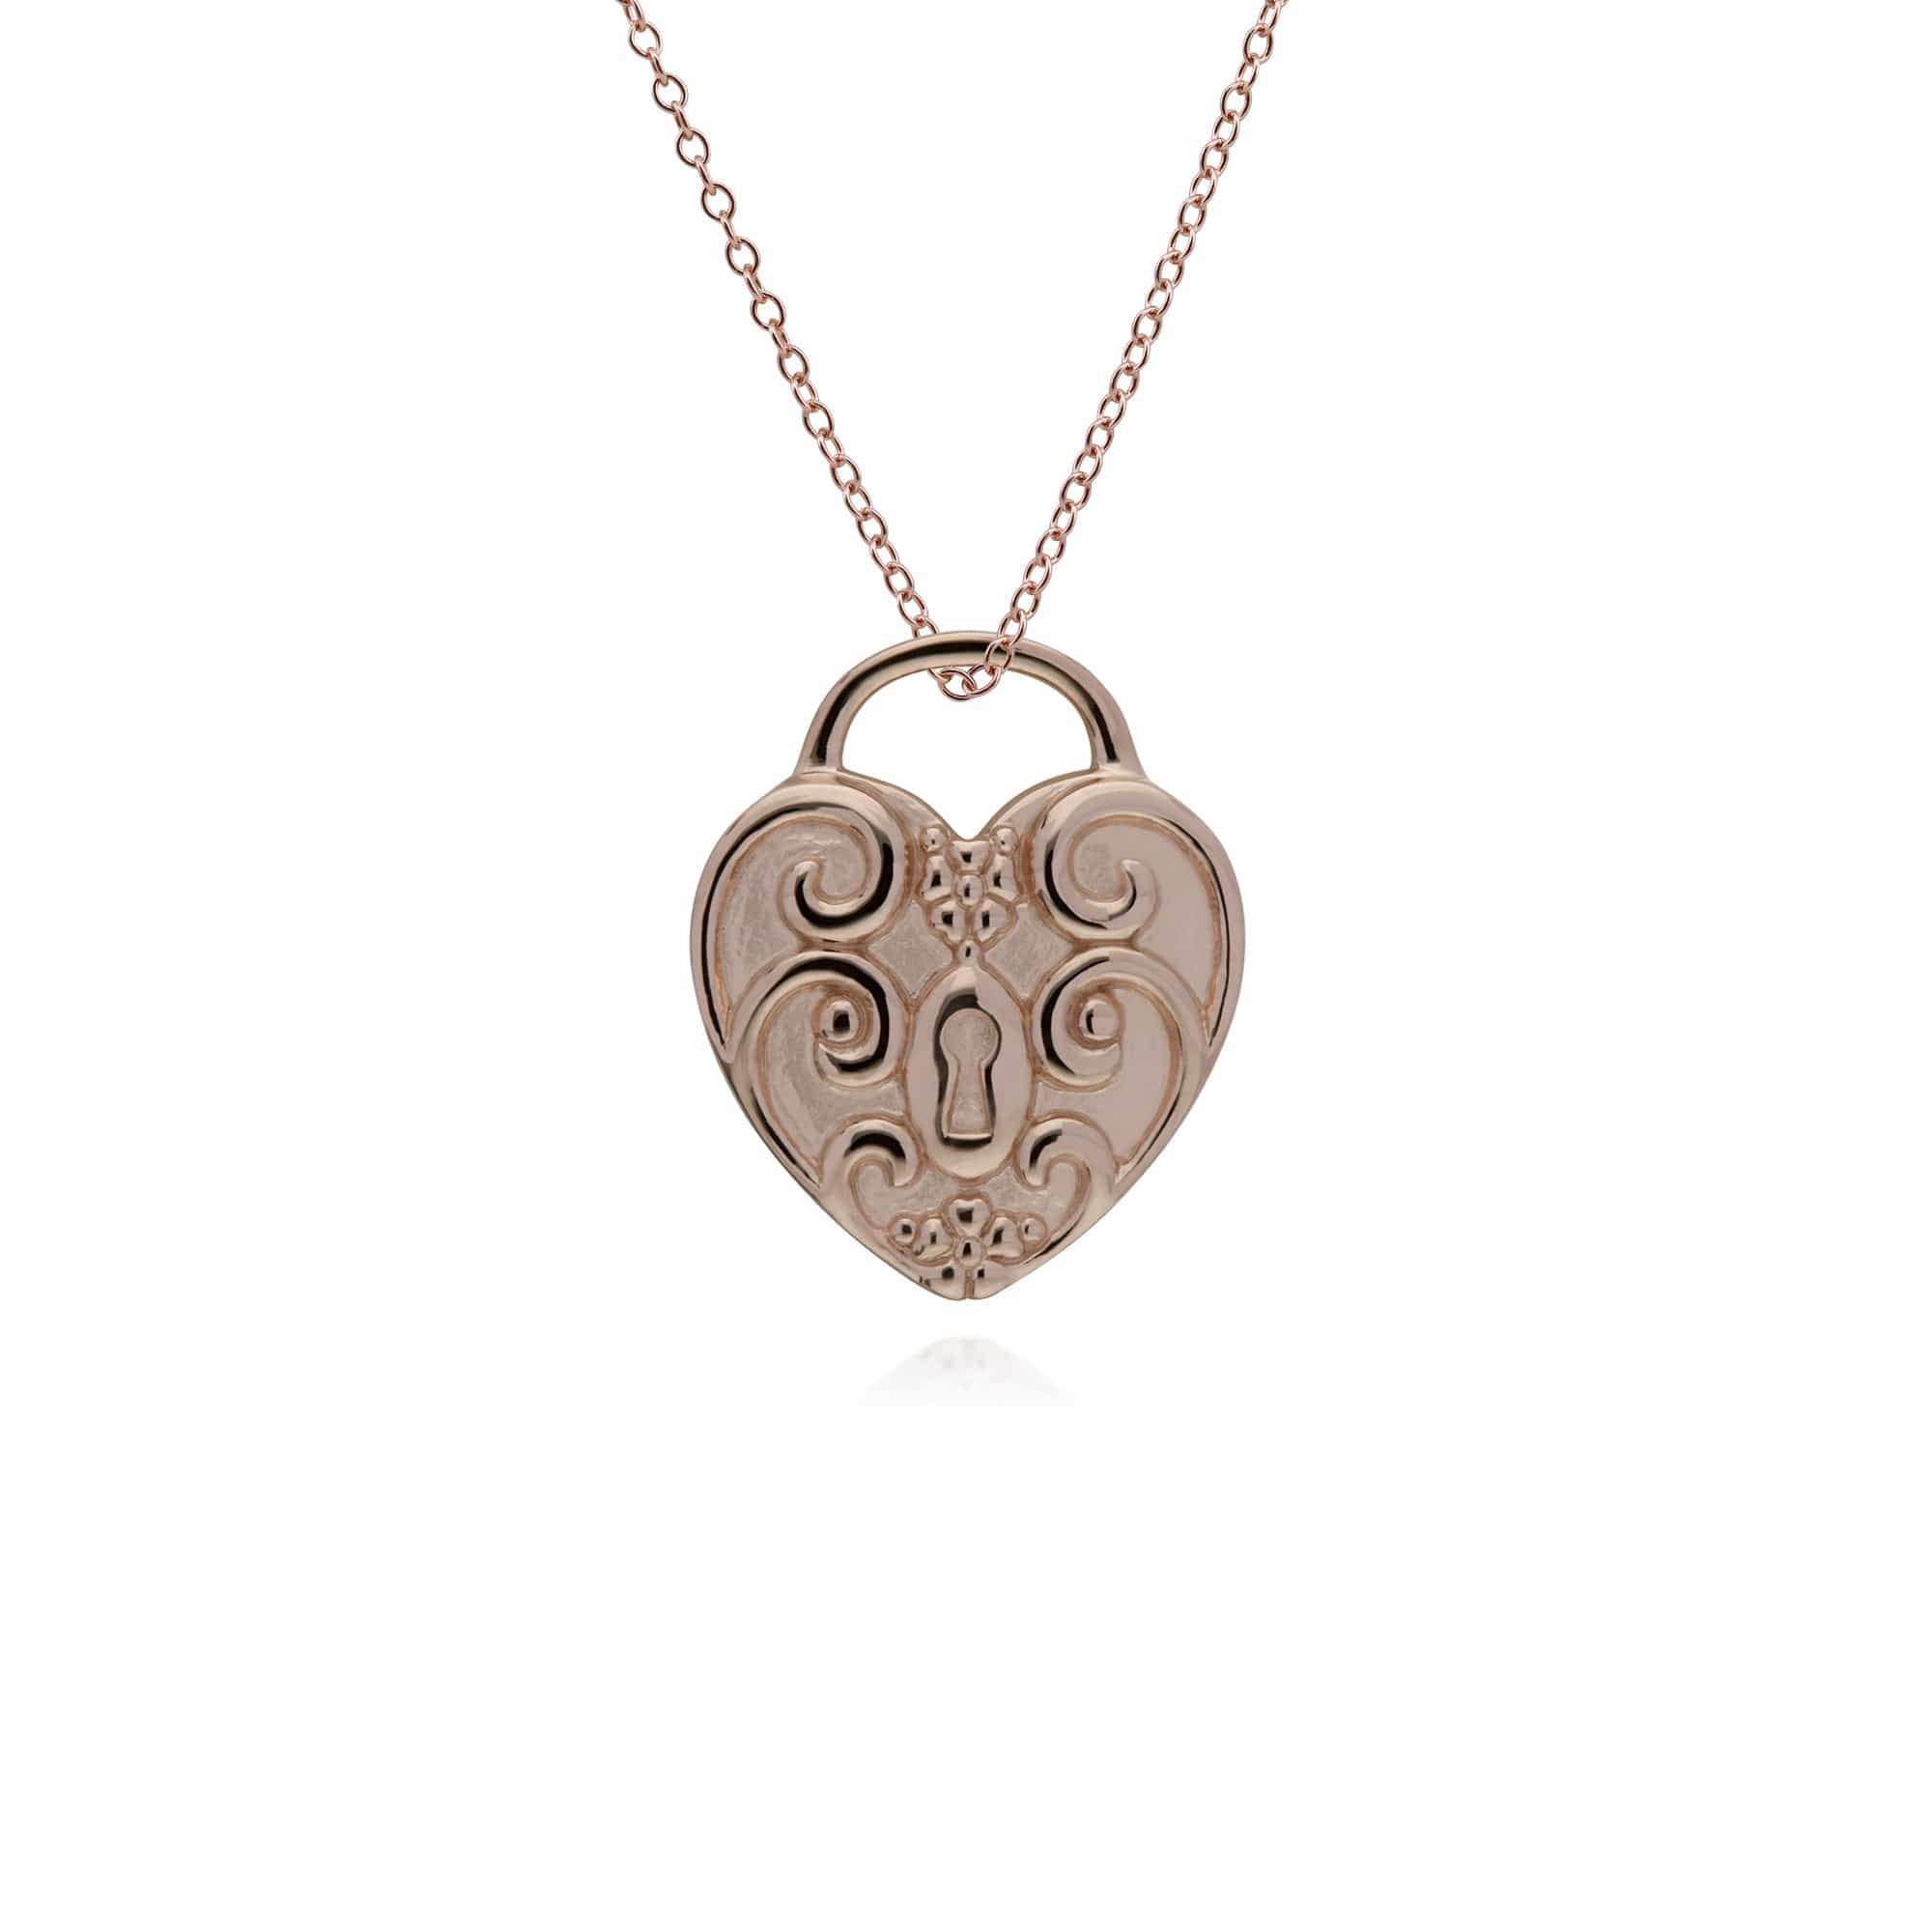 270P026701925-270P026501925 Classic Swirl Heart Lock Pendant & Sapphire Big Key Charm in Rose Gold Plated 925 Sterling Silver 3